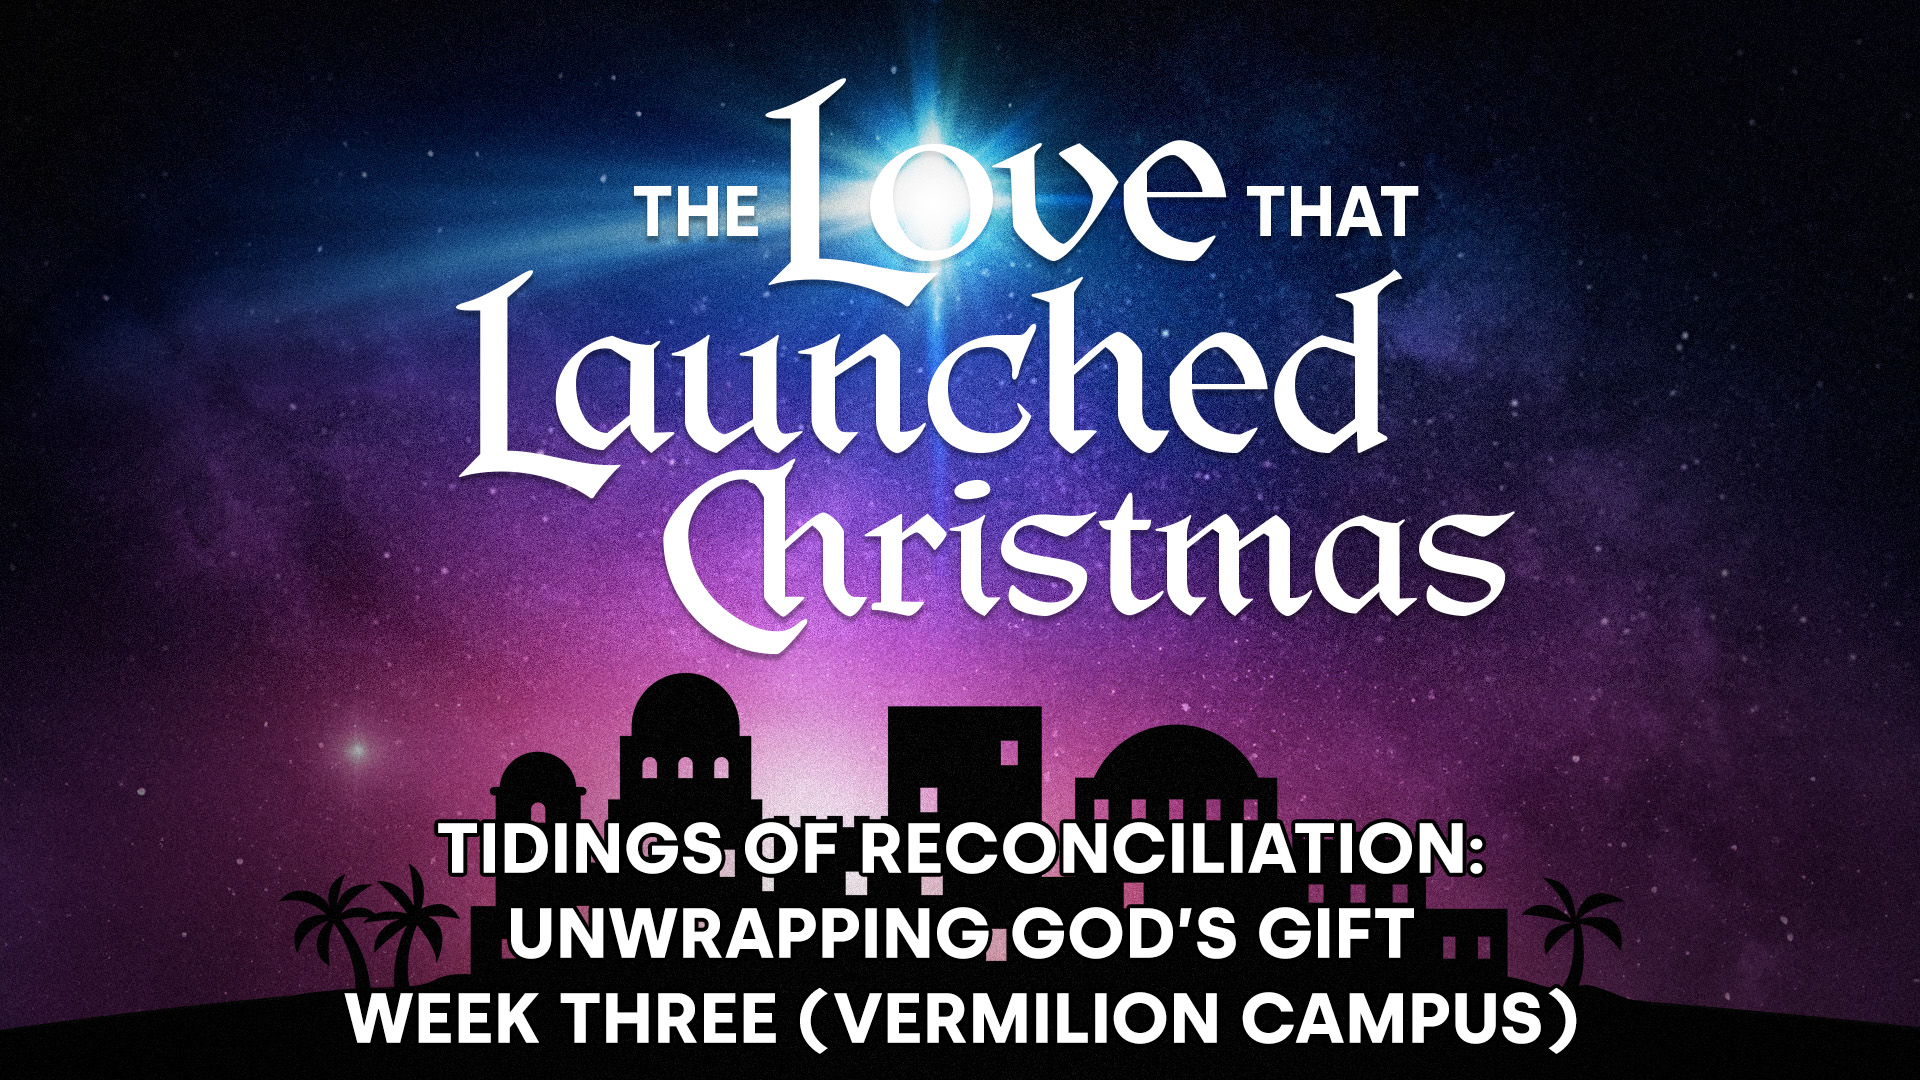 Tidings of reconciliation: Unwrapping God’s gift - Week Three (Vermilion Campus)